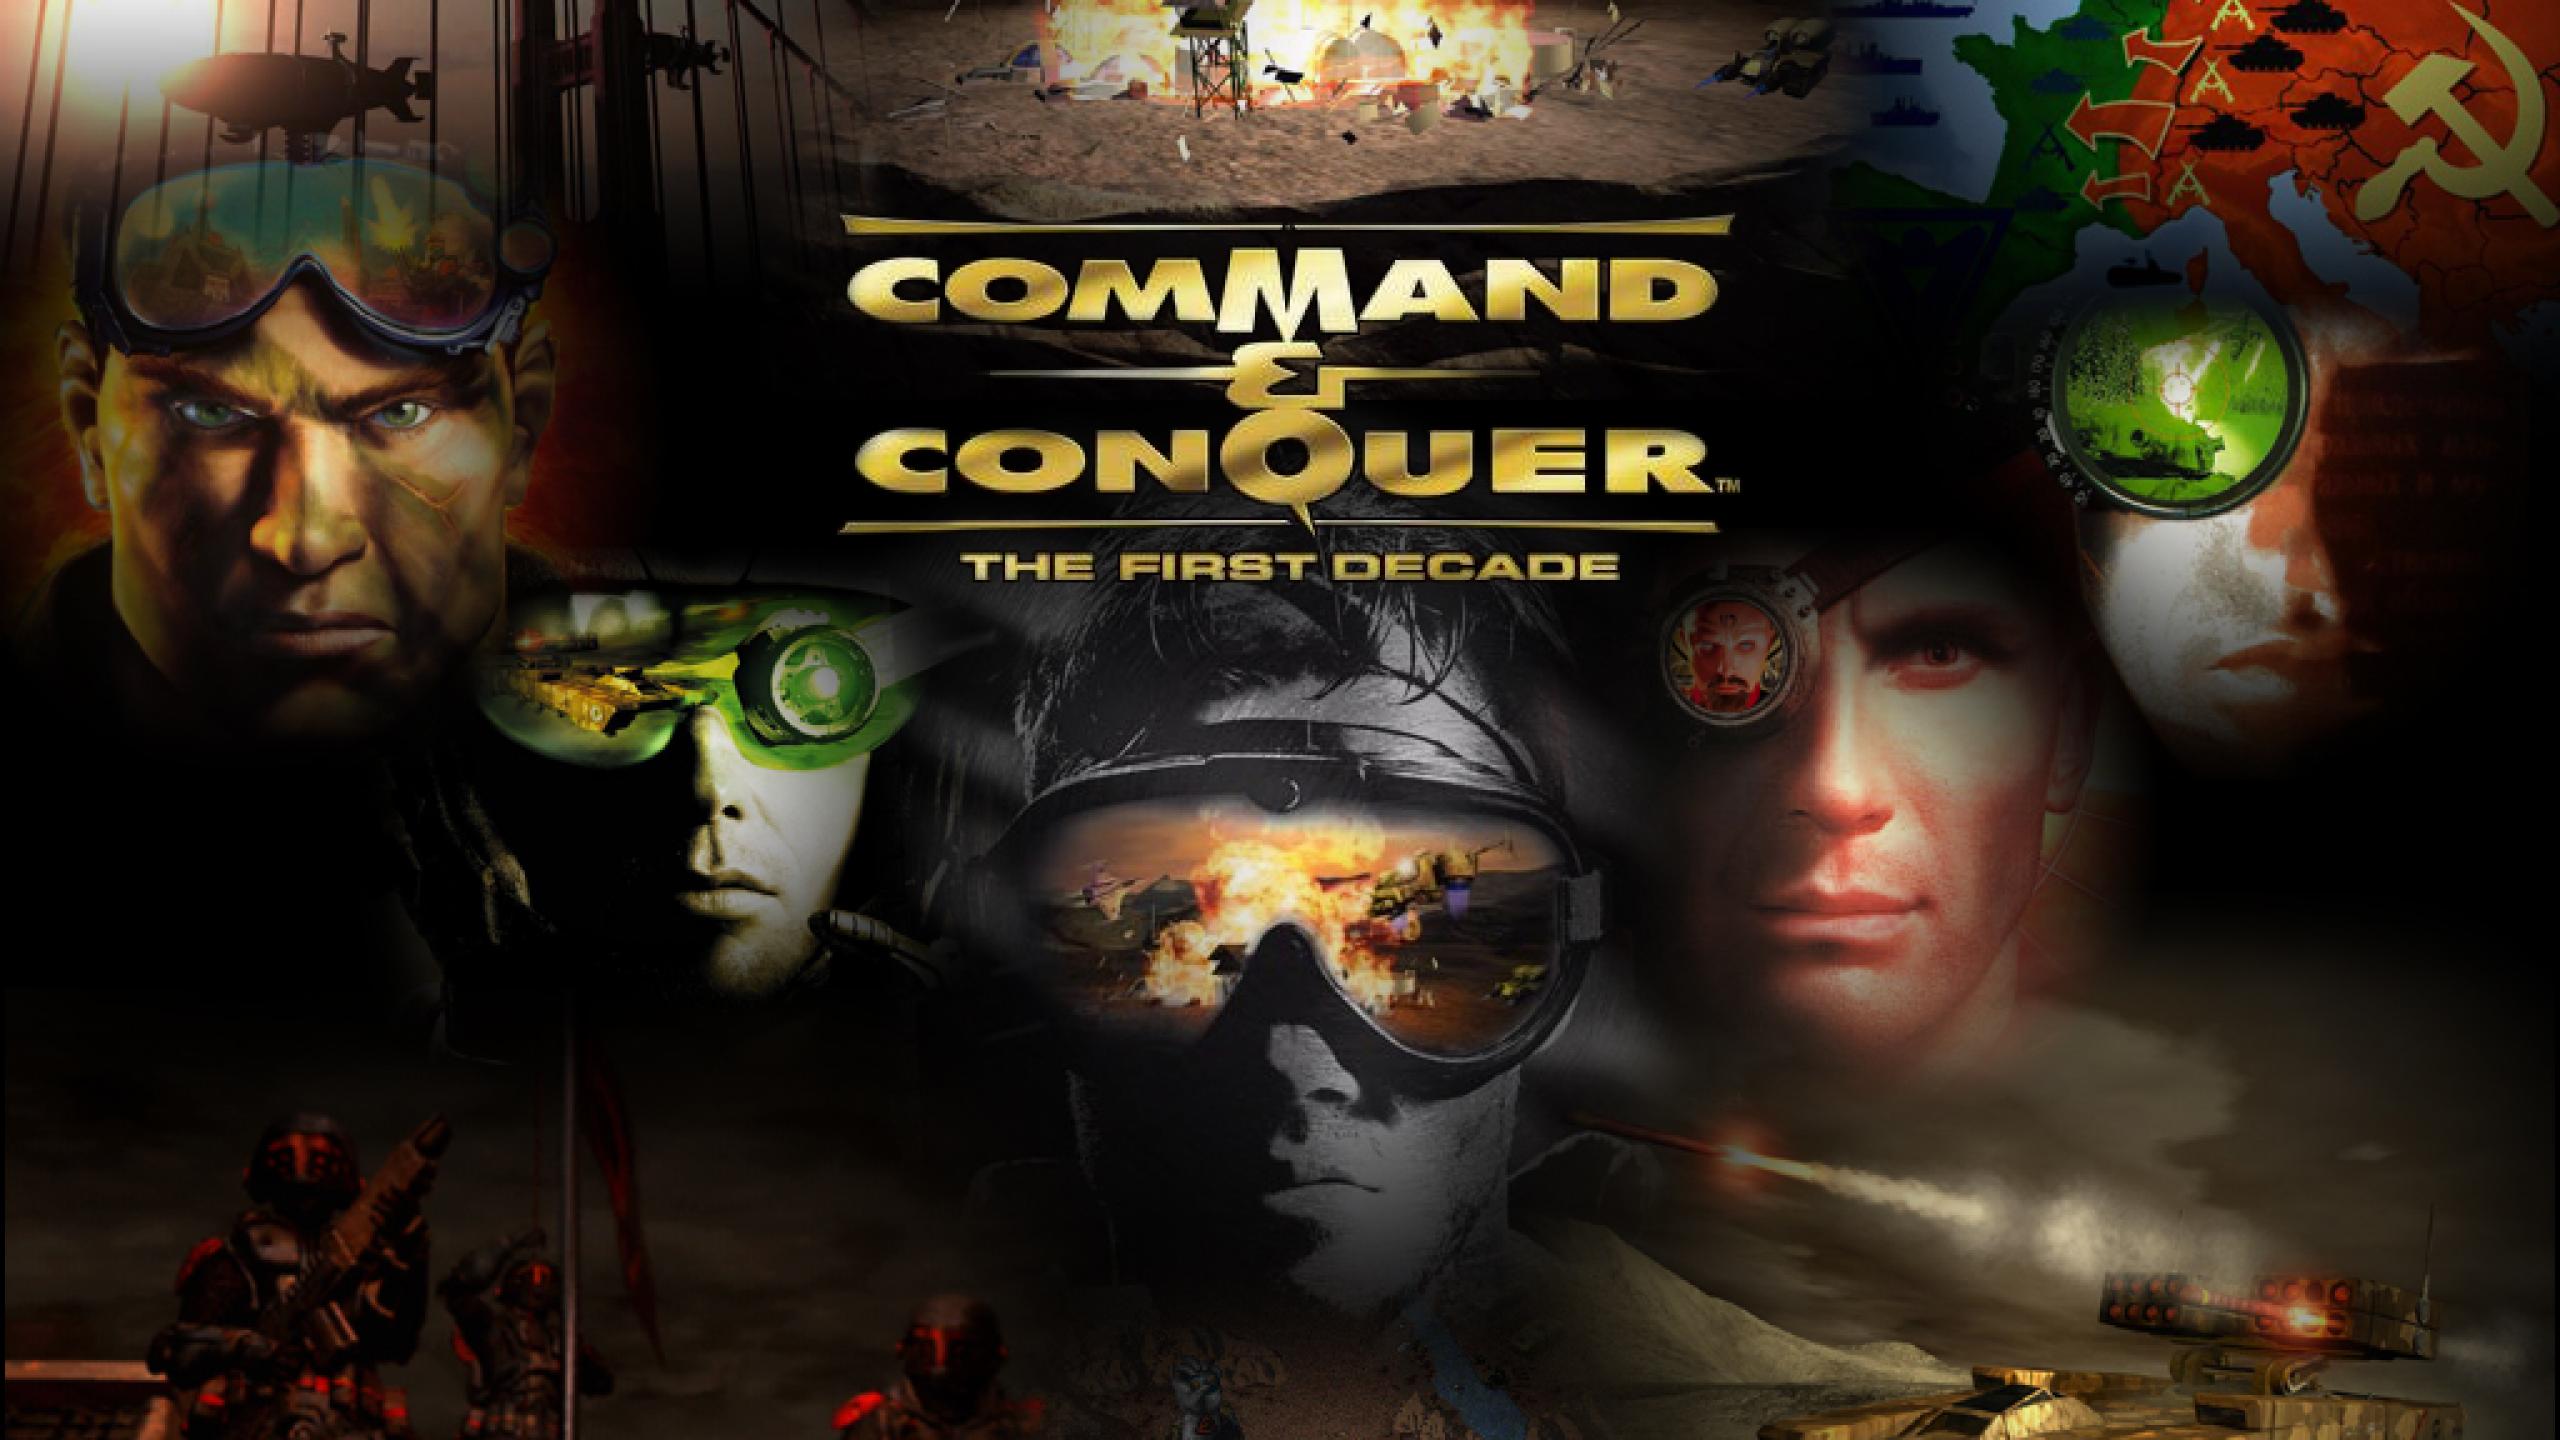 command-&-conquer-hd-wallpapers-32906-12493